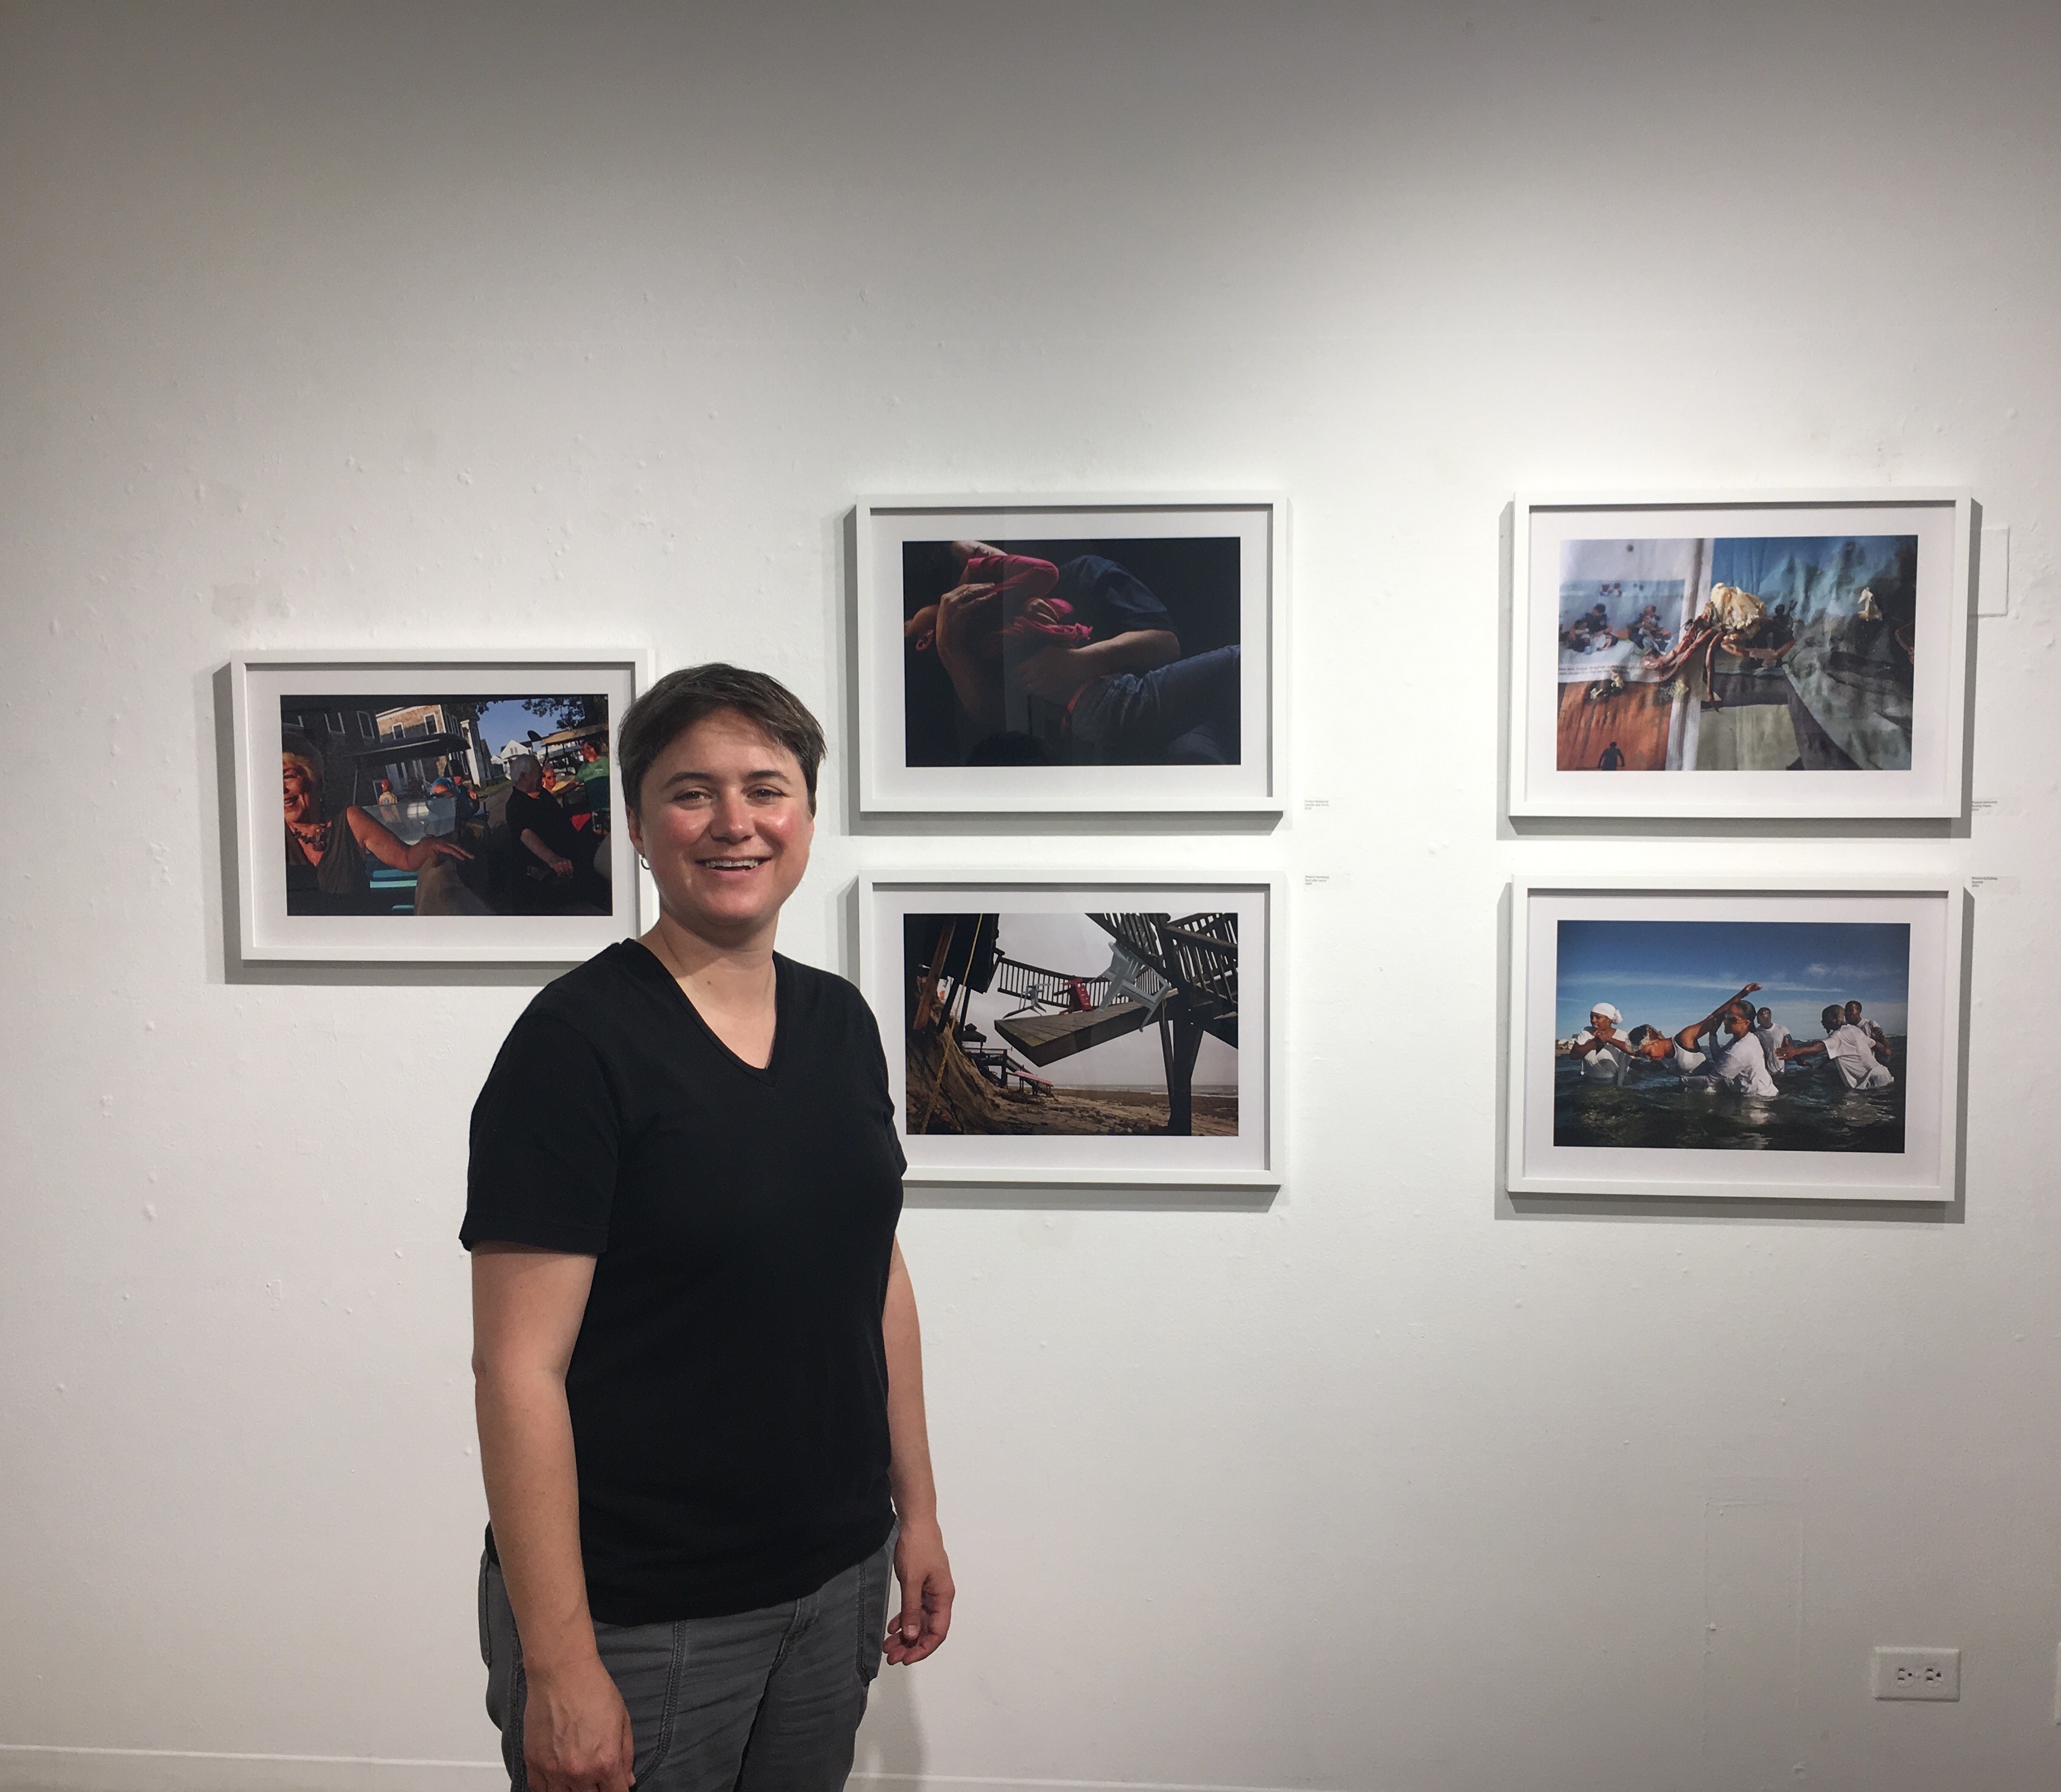 Pulitzer Prize-winner Preston Gannaway stands in front of her exhibition held on City College’s Ocean Campus on September 6, 2017. (Photo by Laurie Maemura)